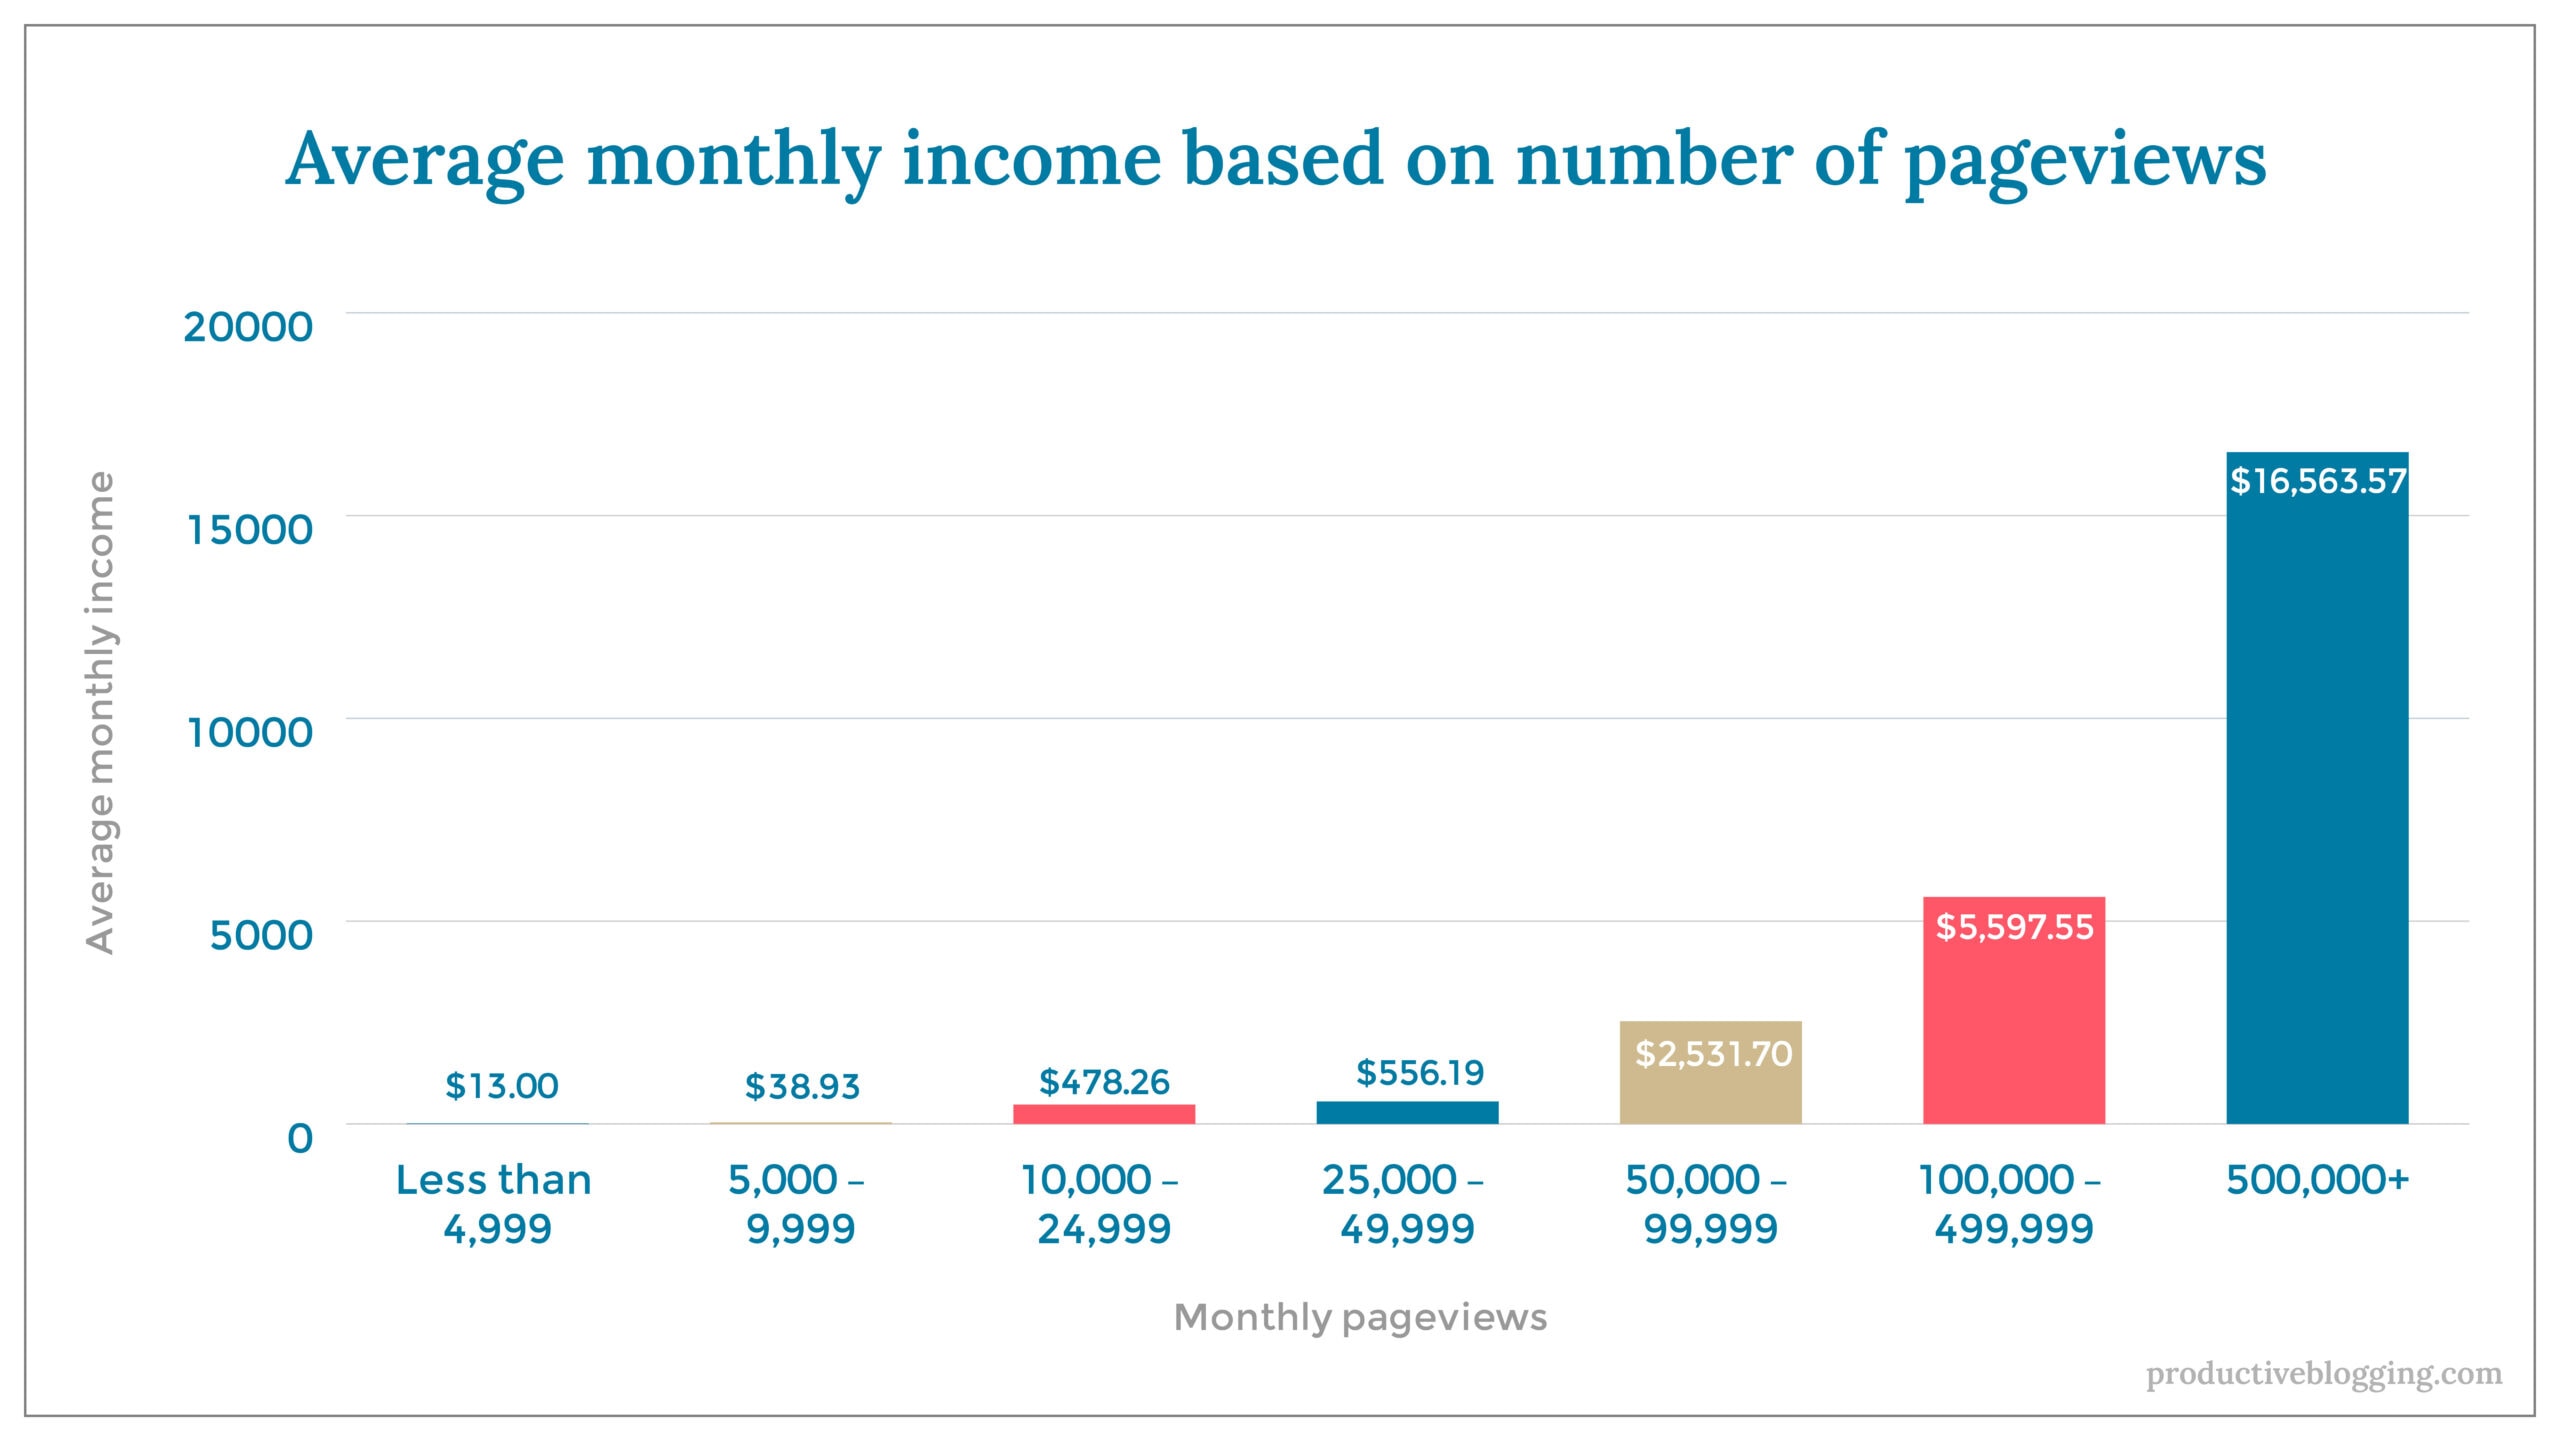 Average monthly income based on number of pageviews X axis: Monthly pageviews Y axis: Average monthly income Less than 4,999 $13.00 5,000 – 9,999 $38.93 10,000 – 24,999 $478.26 25,000 – 49,999 $556.19 50,000 – 99,999 $2,531.70 100,000 – 499,999 $5,597.55 500,000+ $16,563.57